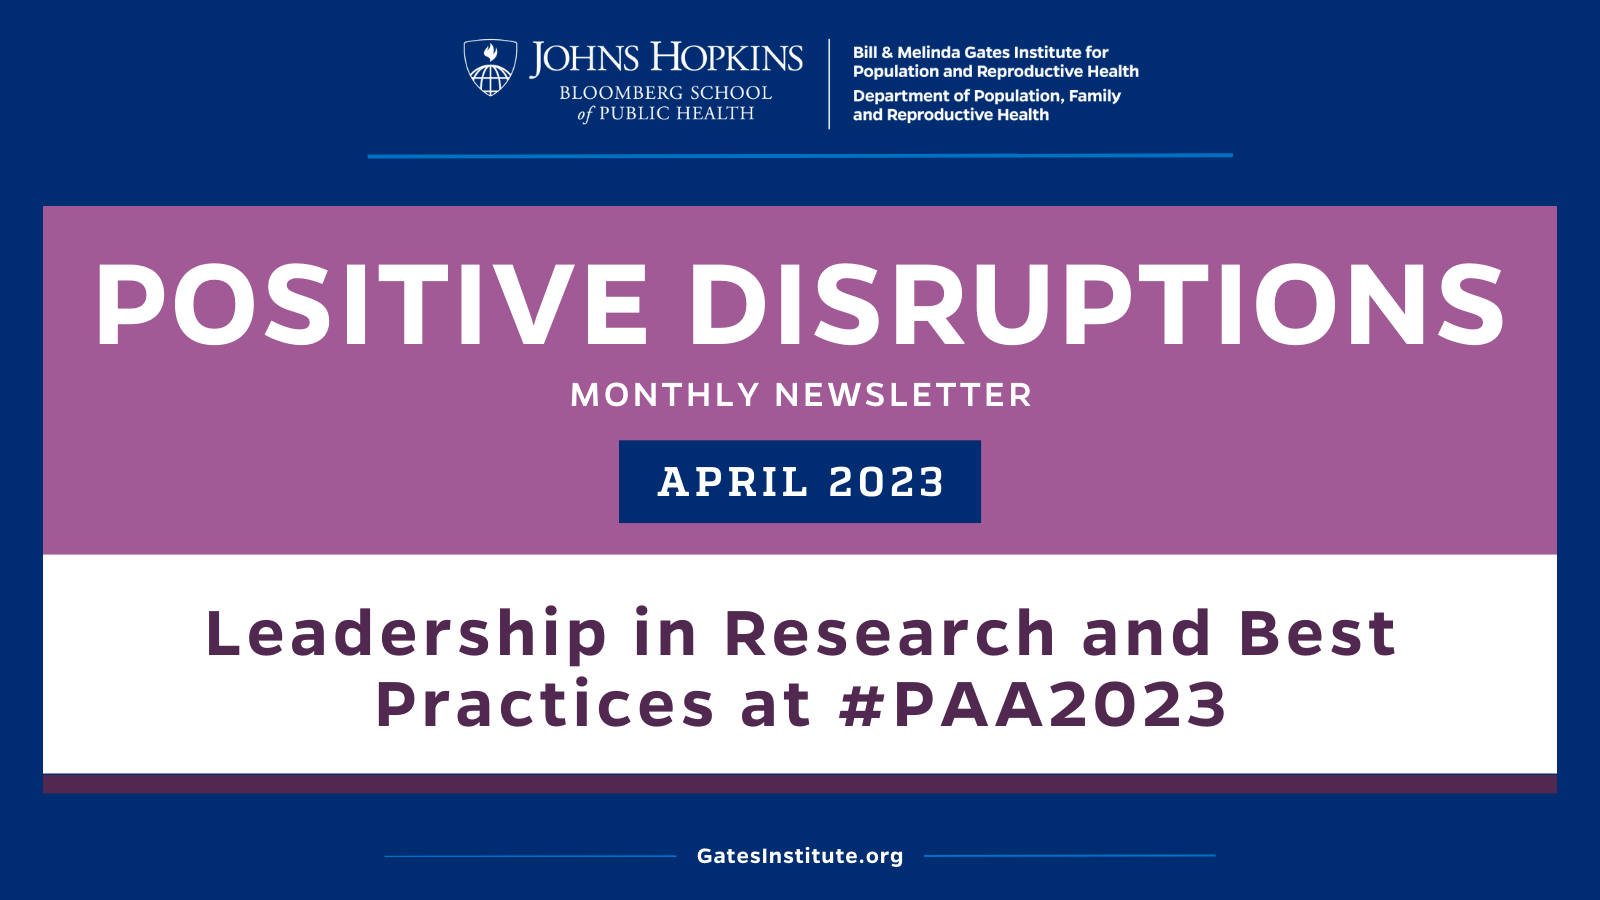 Leadership in Research and Best Practices at #PAA2023